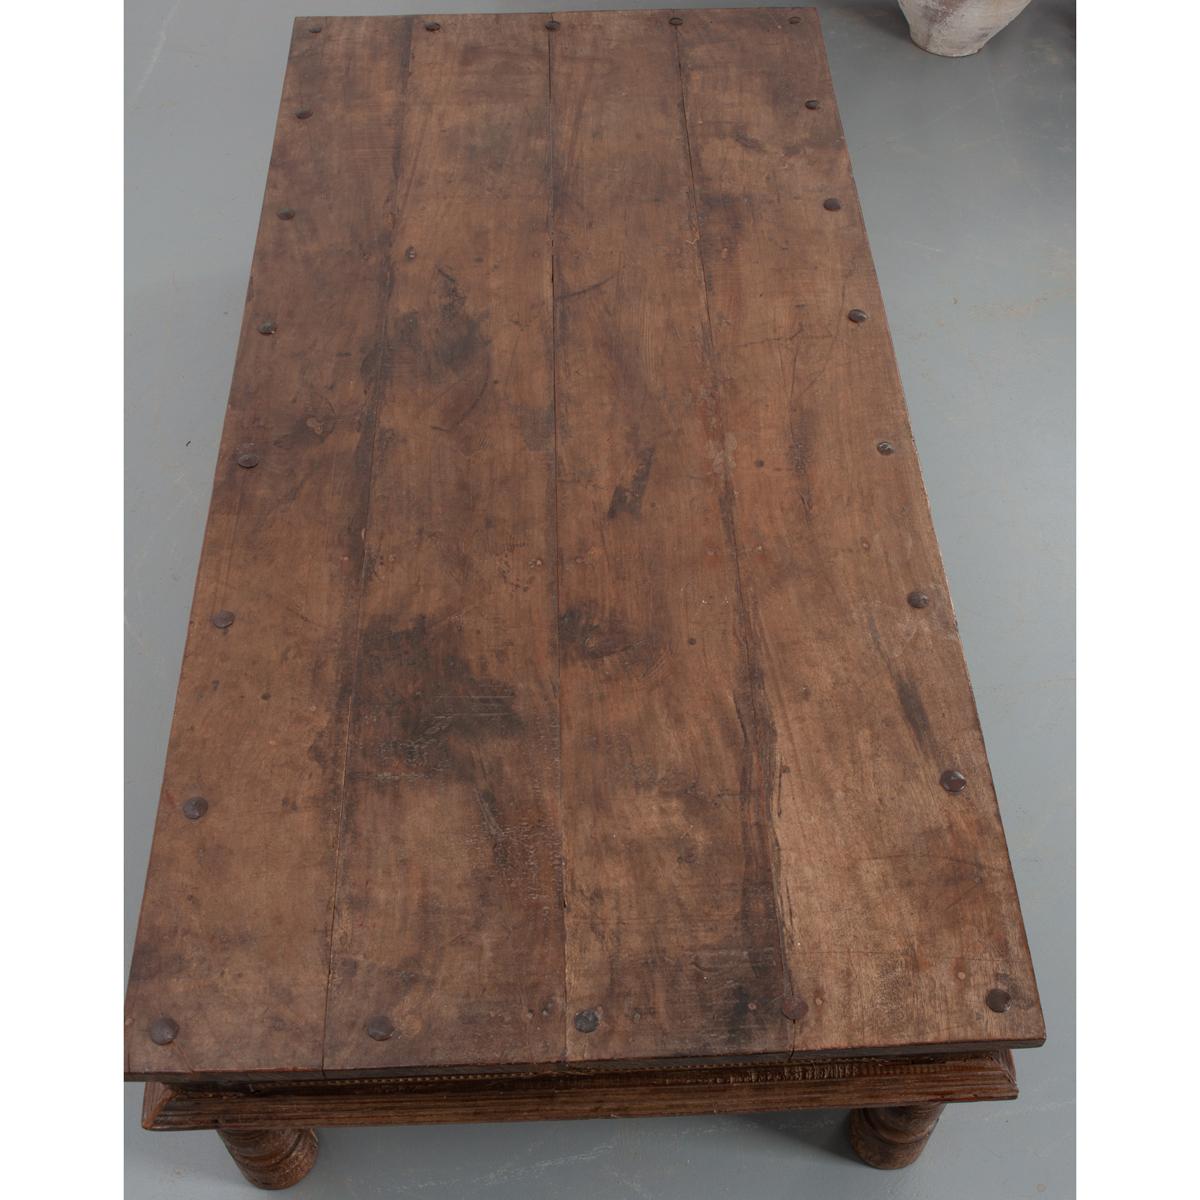 A large Indian teak low table – purchased in France – from the late 19th Century. It has a rich finish and beautiful nailhead trim around the top perimeter of the table. The apron has a nice carved banding wrapping the table and metal brackets at